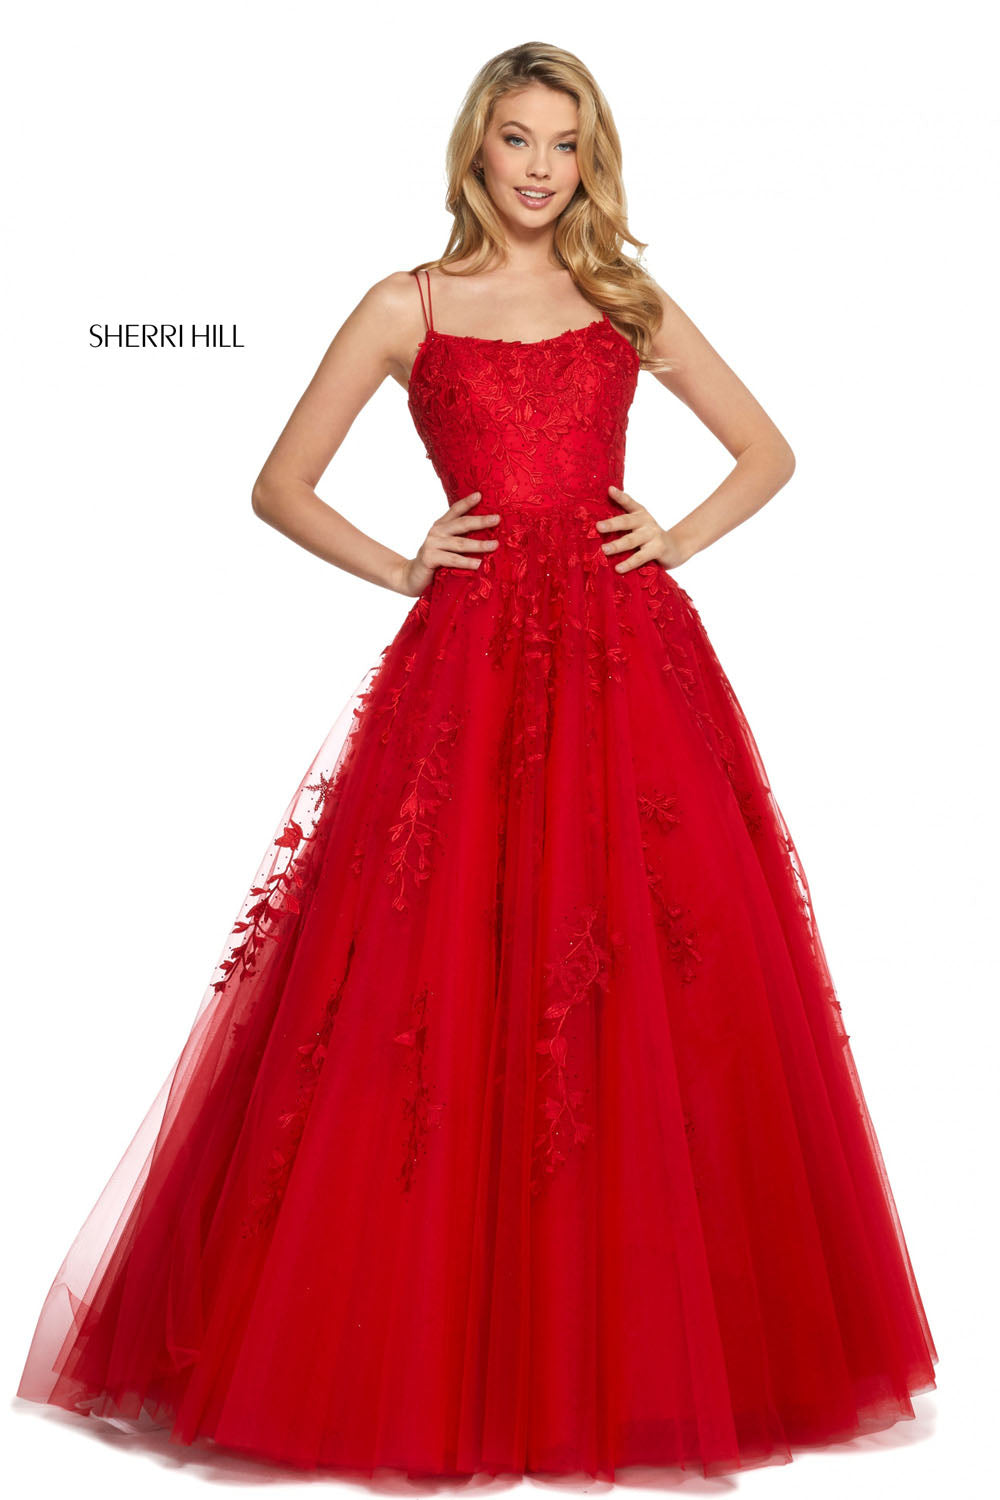 4th of July Inspired Looks from Sherri Hill